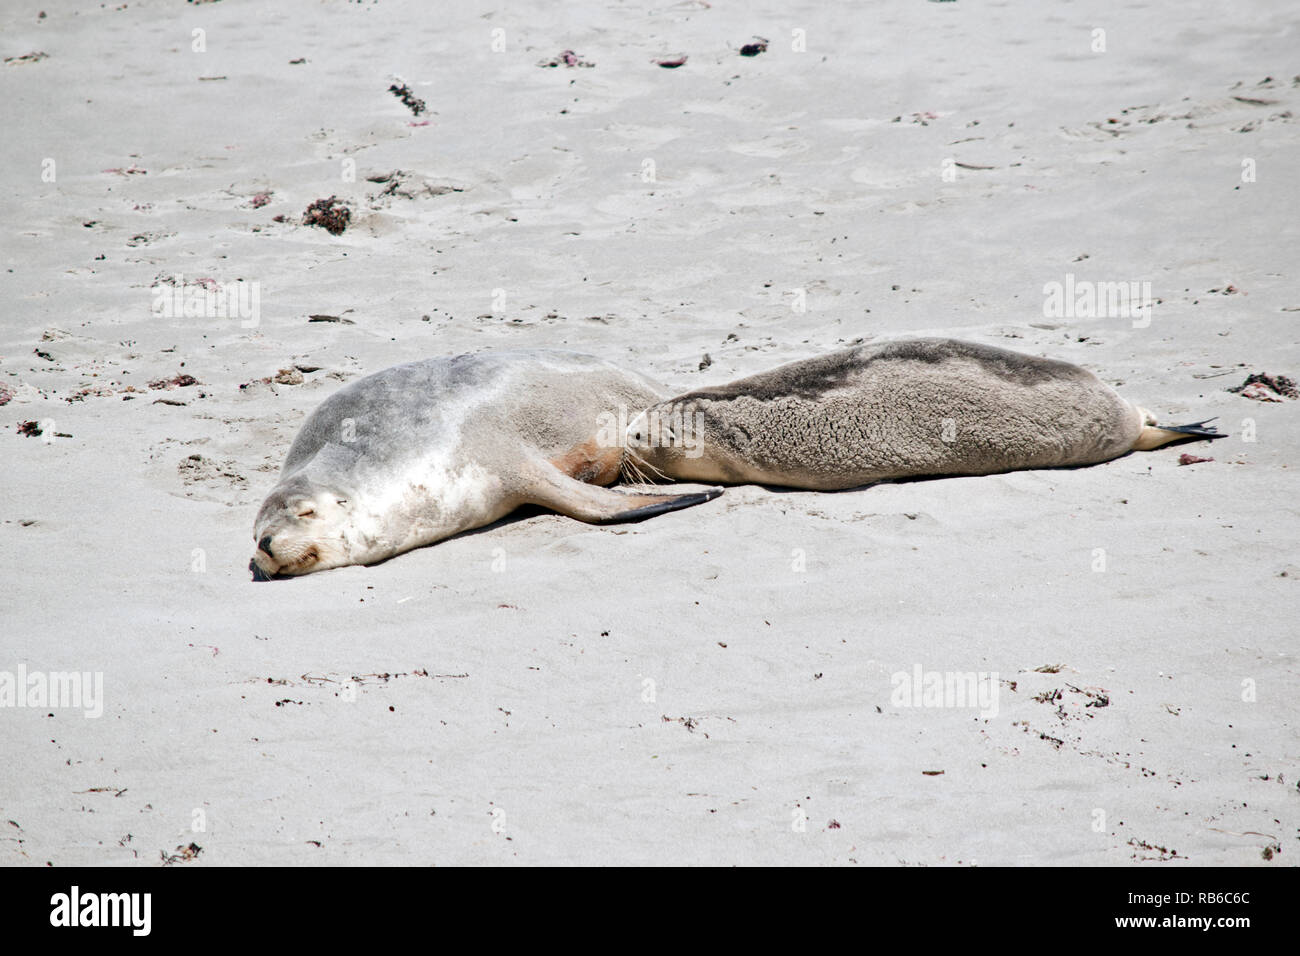 the mother sea lion is feeding her pup.  The mother rests while the pup drinks. Stock Photo